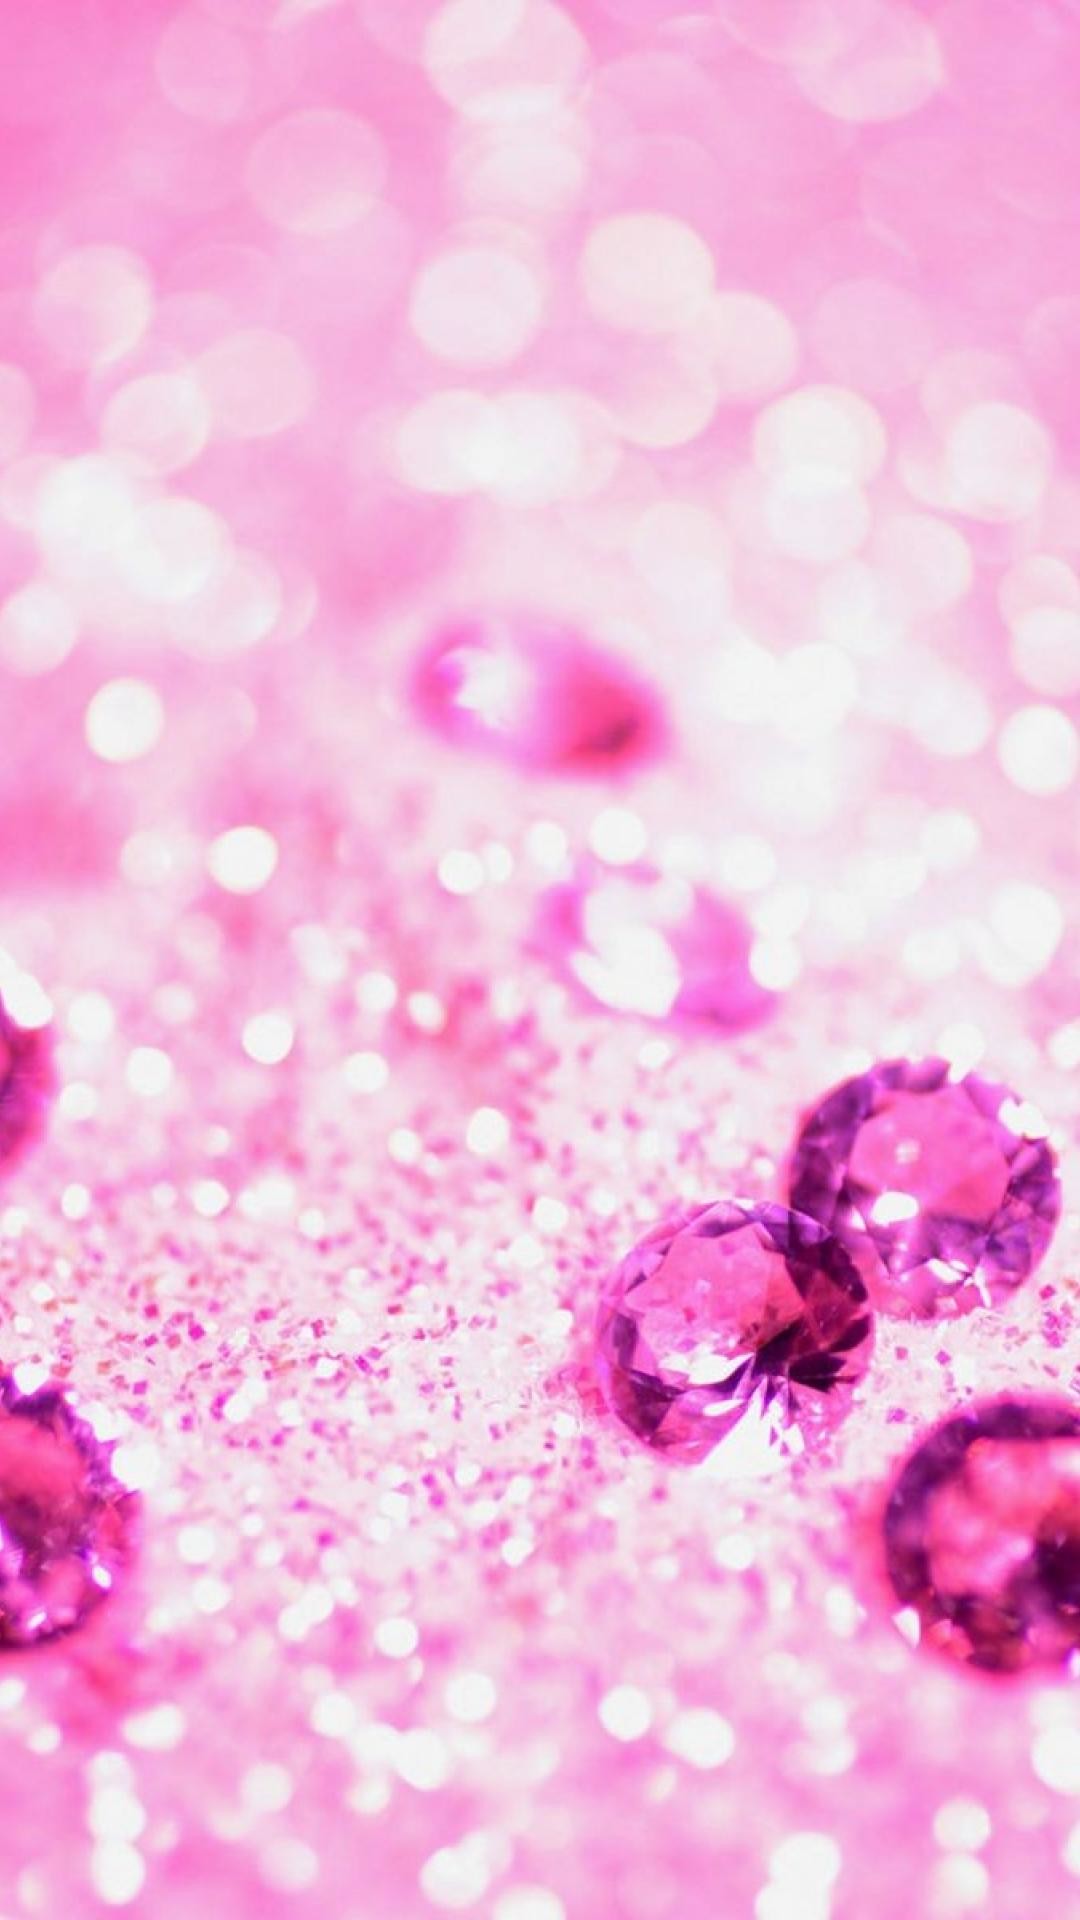 1080x1920 Lots of pink jewelry | Girly glitter iPhone wallpapers